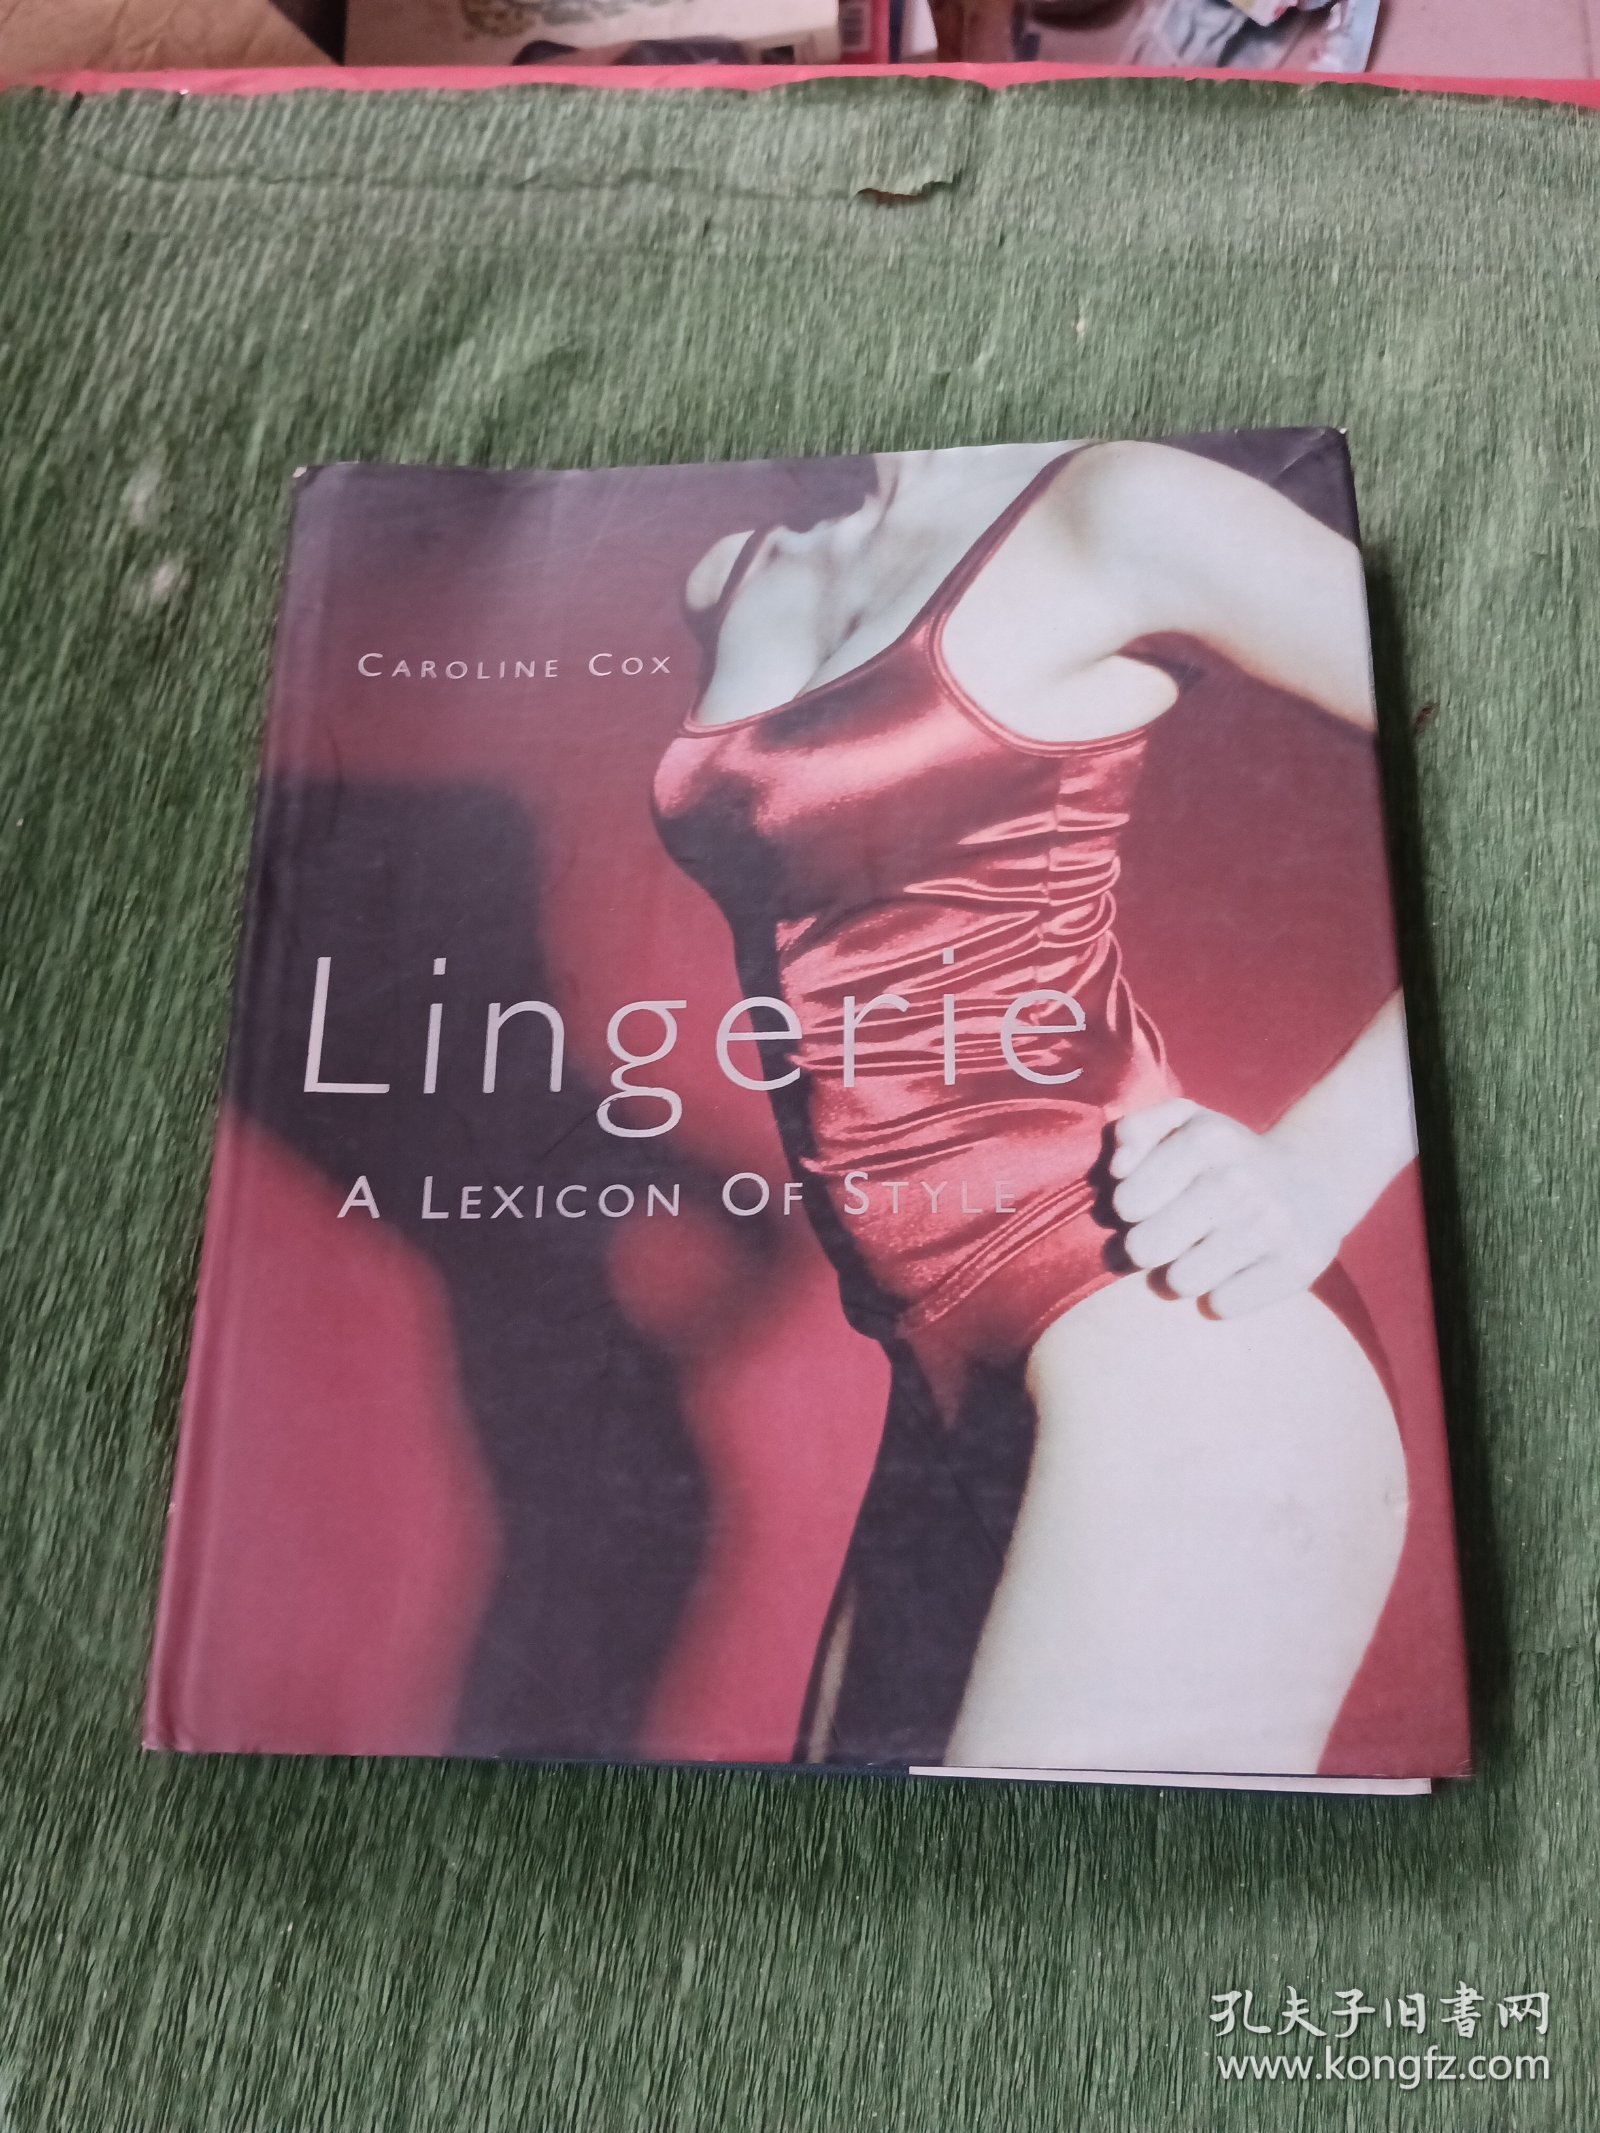 Lingerie A LEXICON OF STYLE